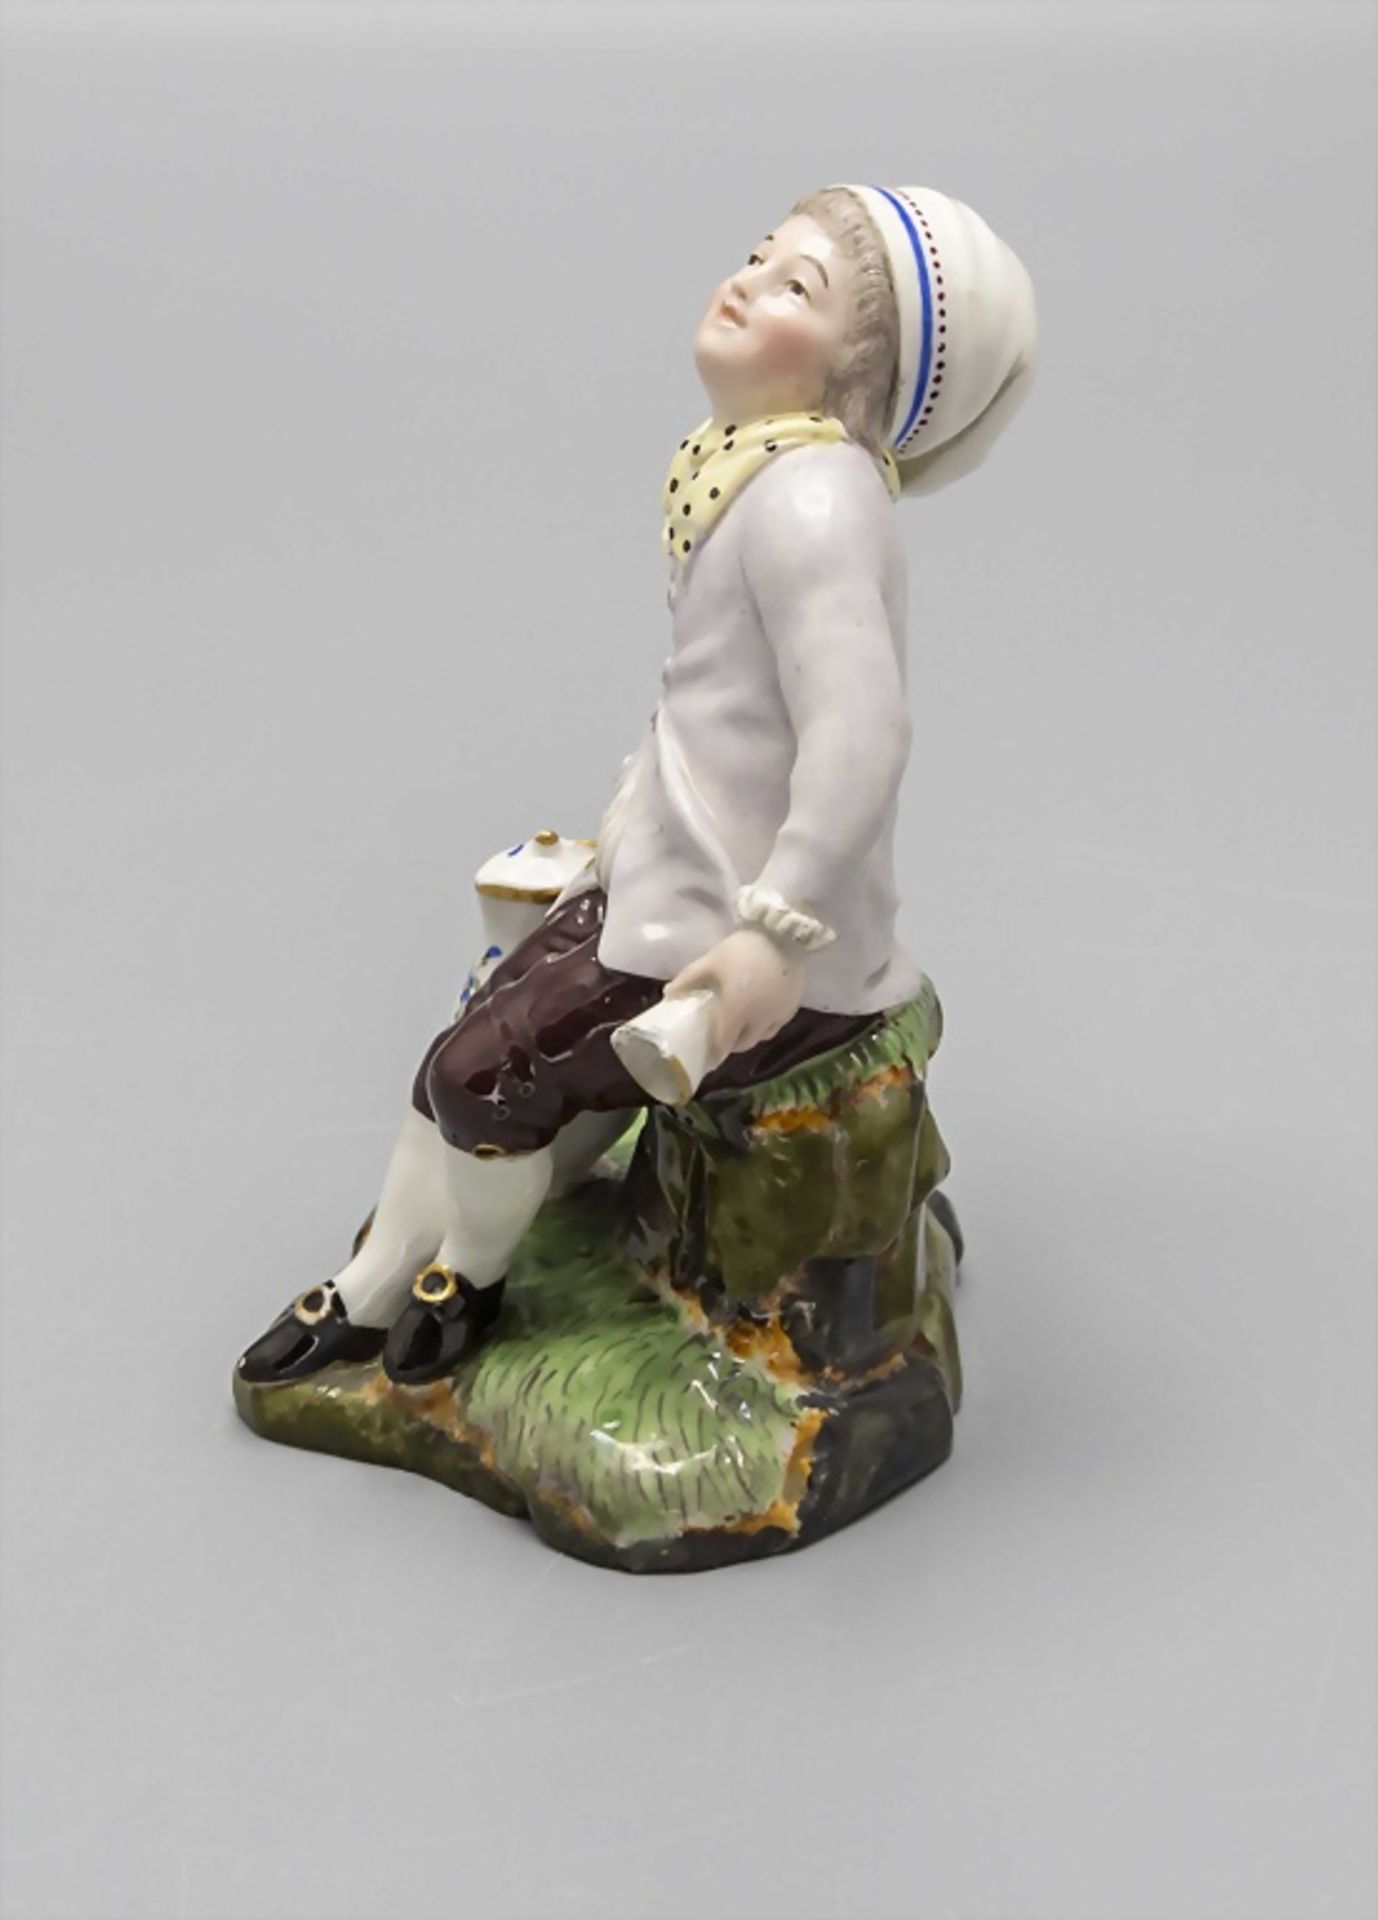 Kinderfigur 'Knabe mit Becher und Kanne' / A boy with a jug and a cup, wohl Passau, Anfang 20. Jh. - Image 4 of 6